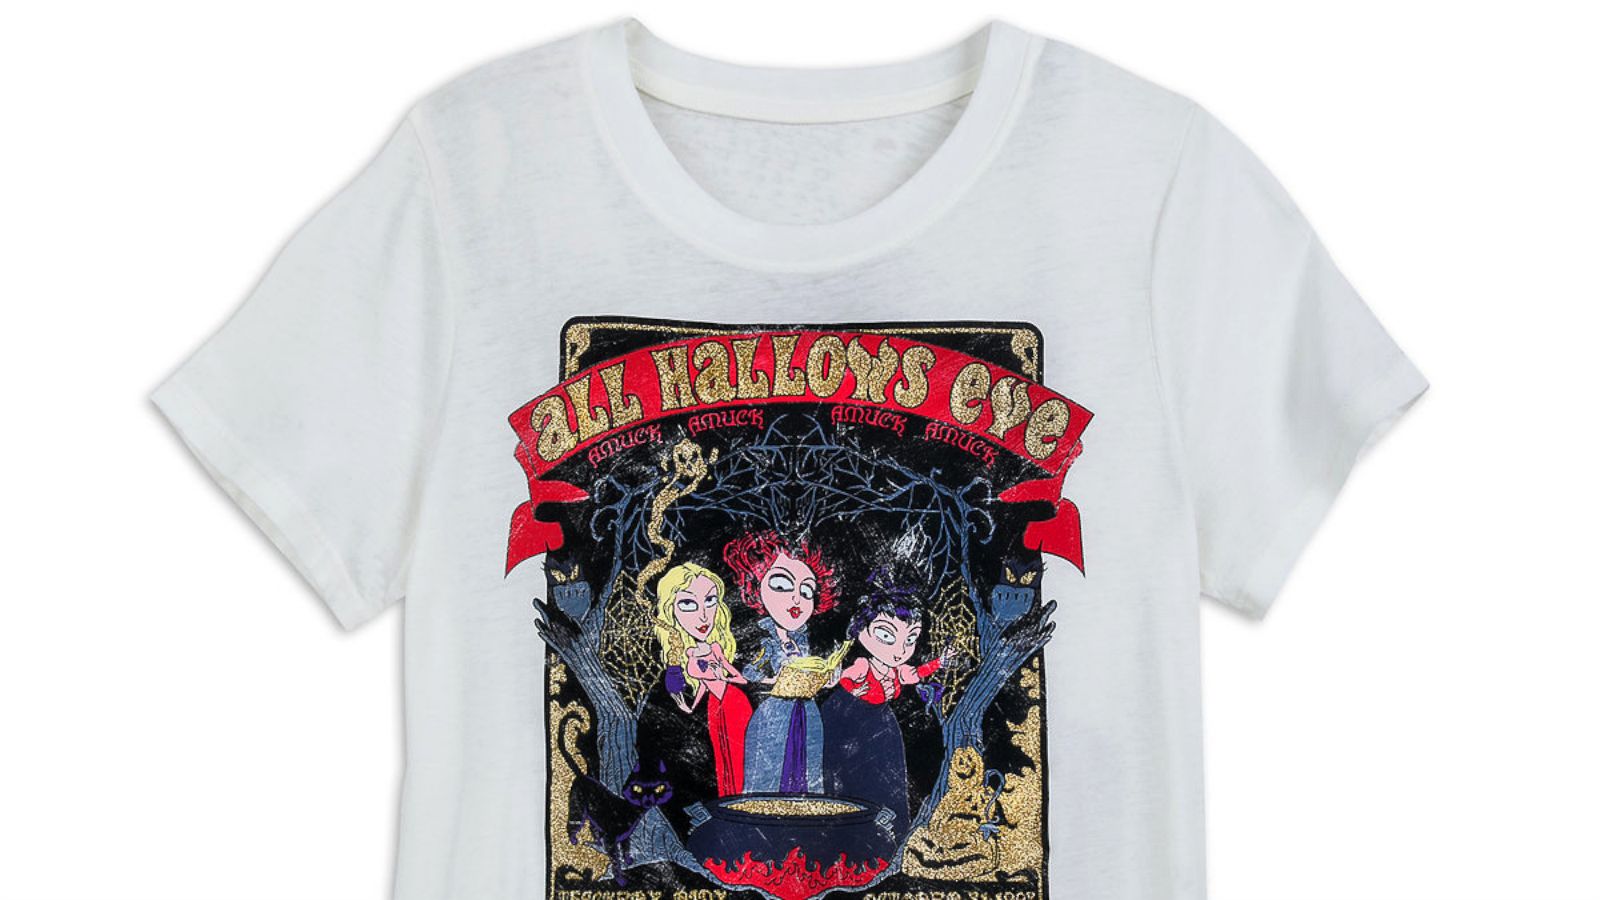 PHOTO: Celebrate the 25th anniversary of 'Hocus Pocus' with this All Hallows Eve t-shirt.